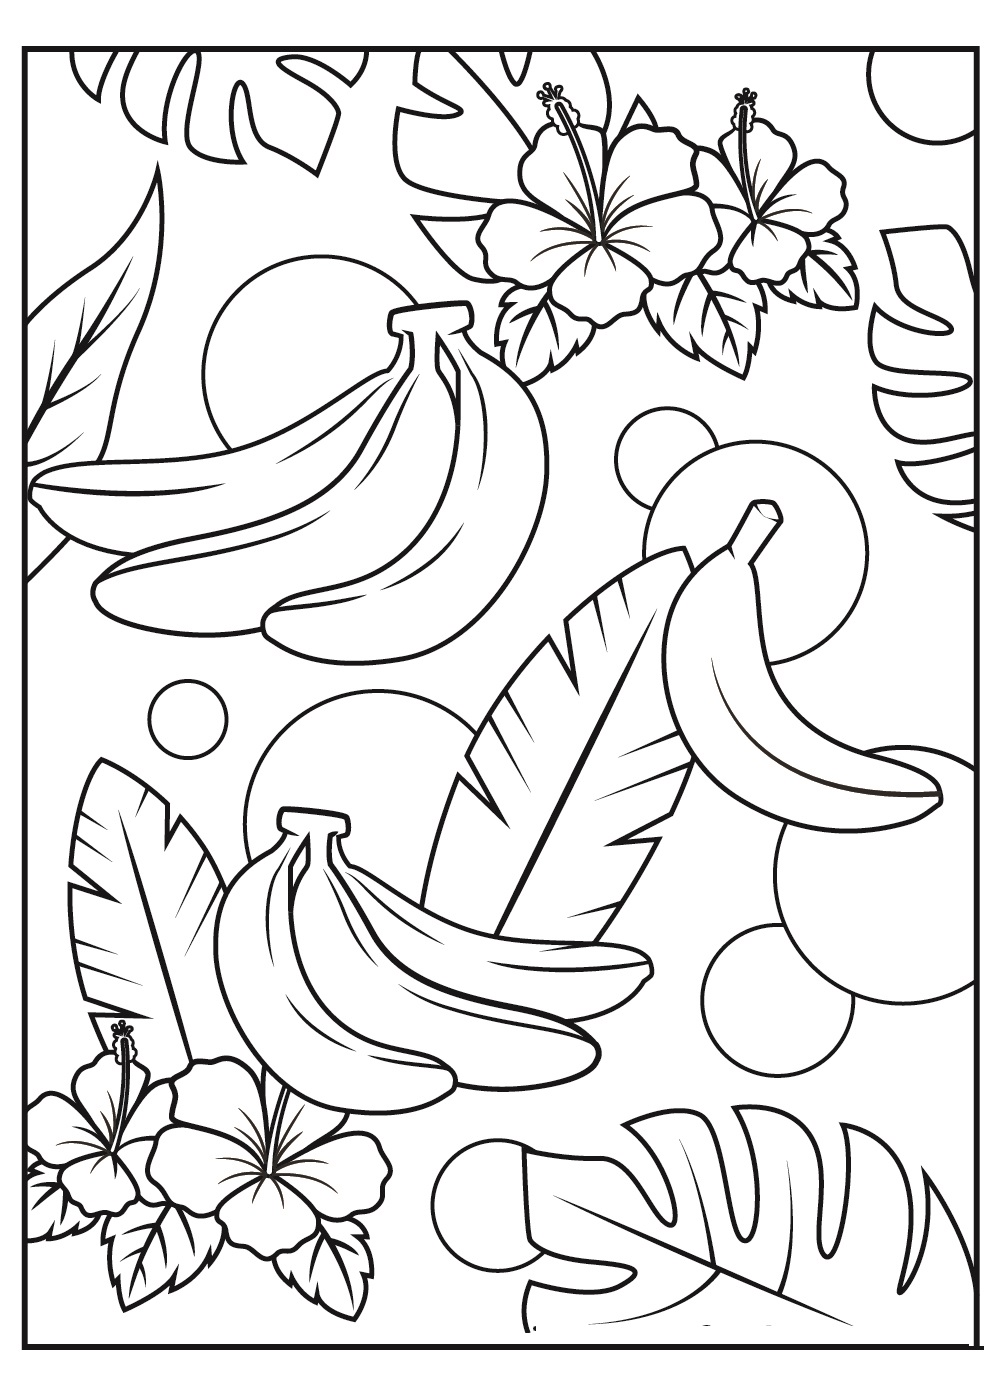 82 Dancing Banana Coloring Pages  Latest Free